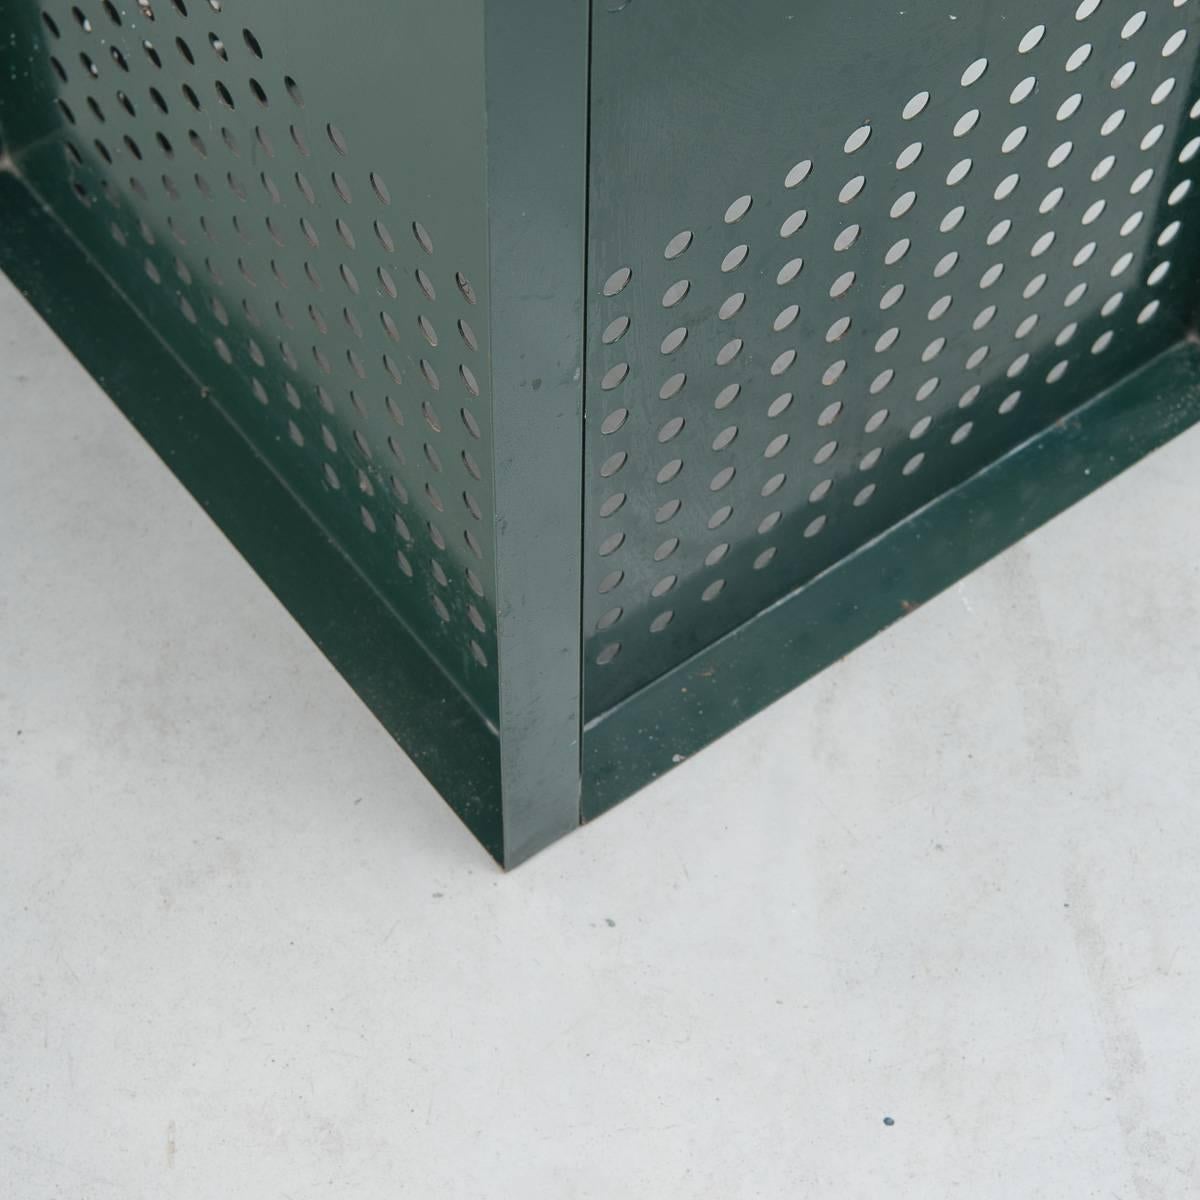 Late 20th Century Green Perforated Metal Chair